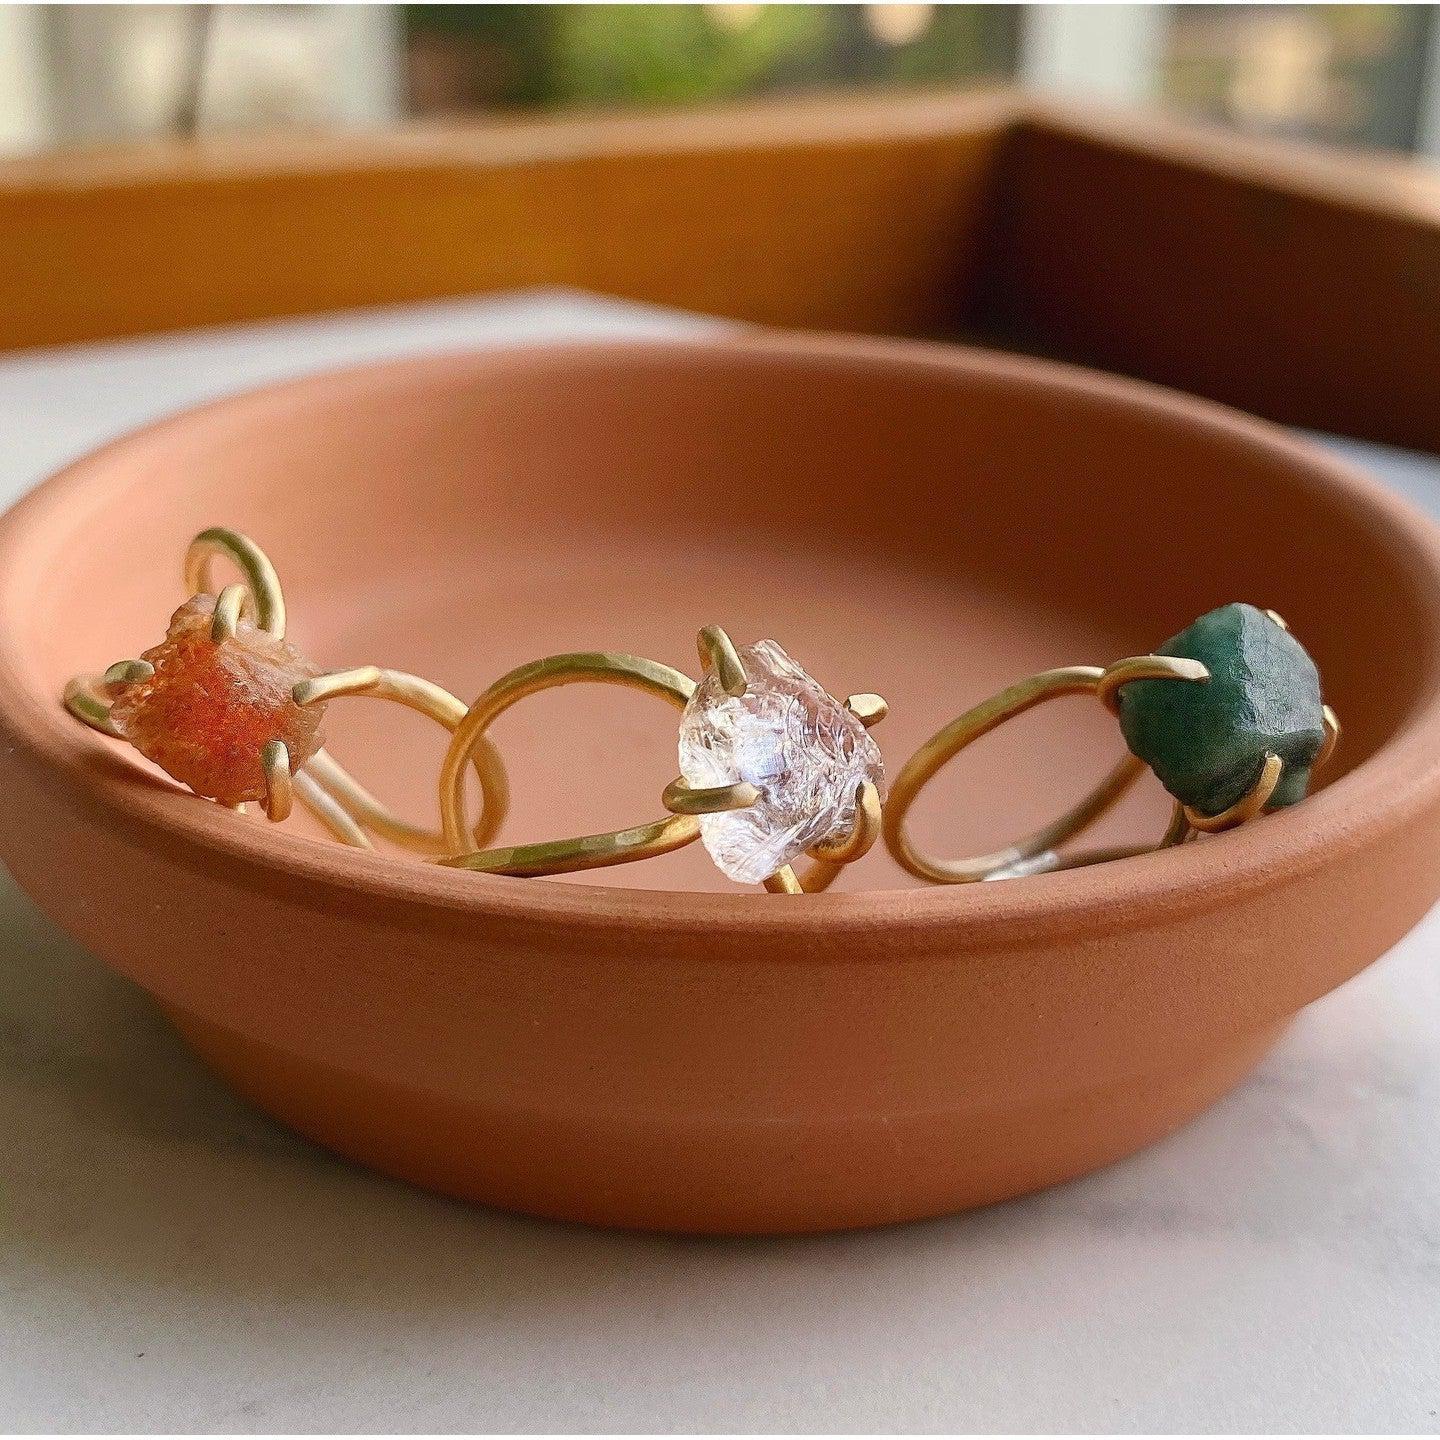 raw gemstone rings with brass double wire band with sunstone which is an orange gemstone, ametrine which is clear to purple, and emerald which is a forest green color. The rings are sitting in a terracotta pottery dish.  